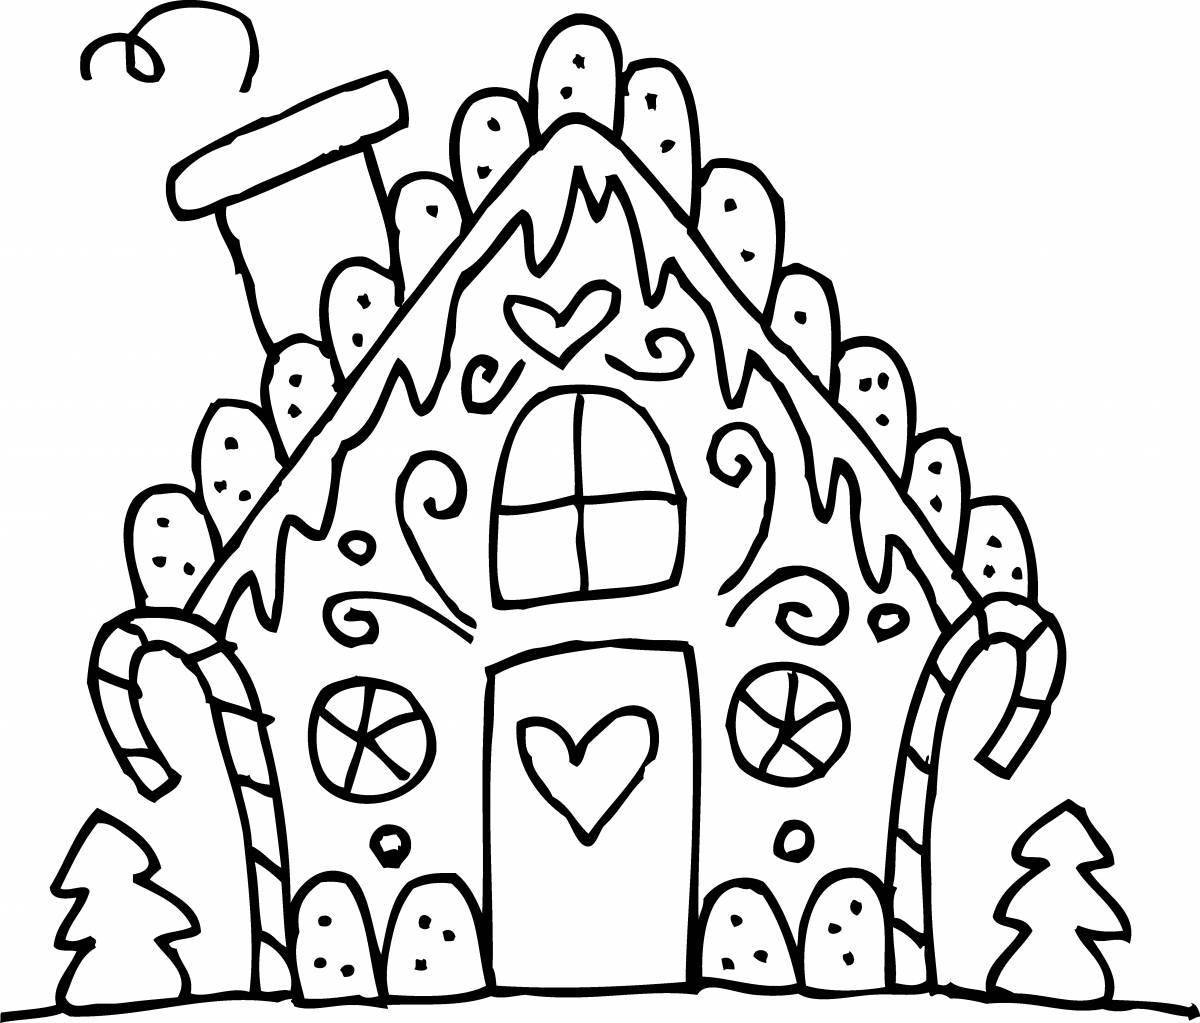 Gorgeous gingerbread house coloring book for kids